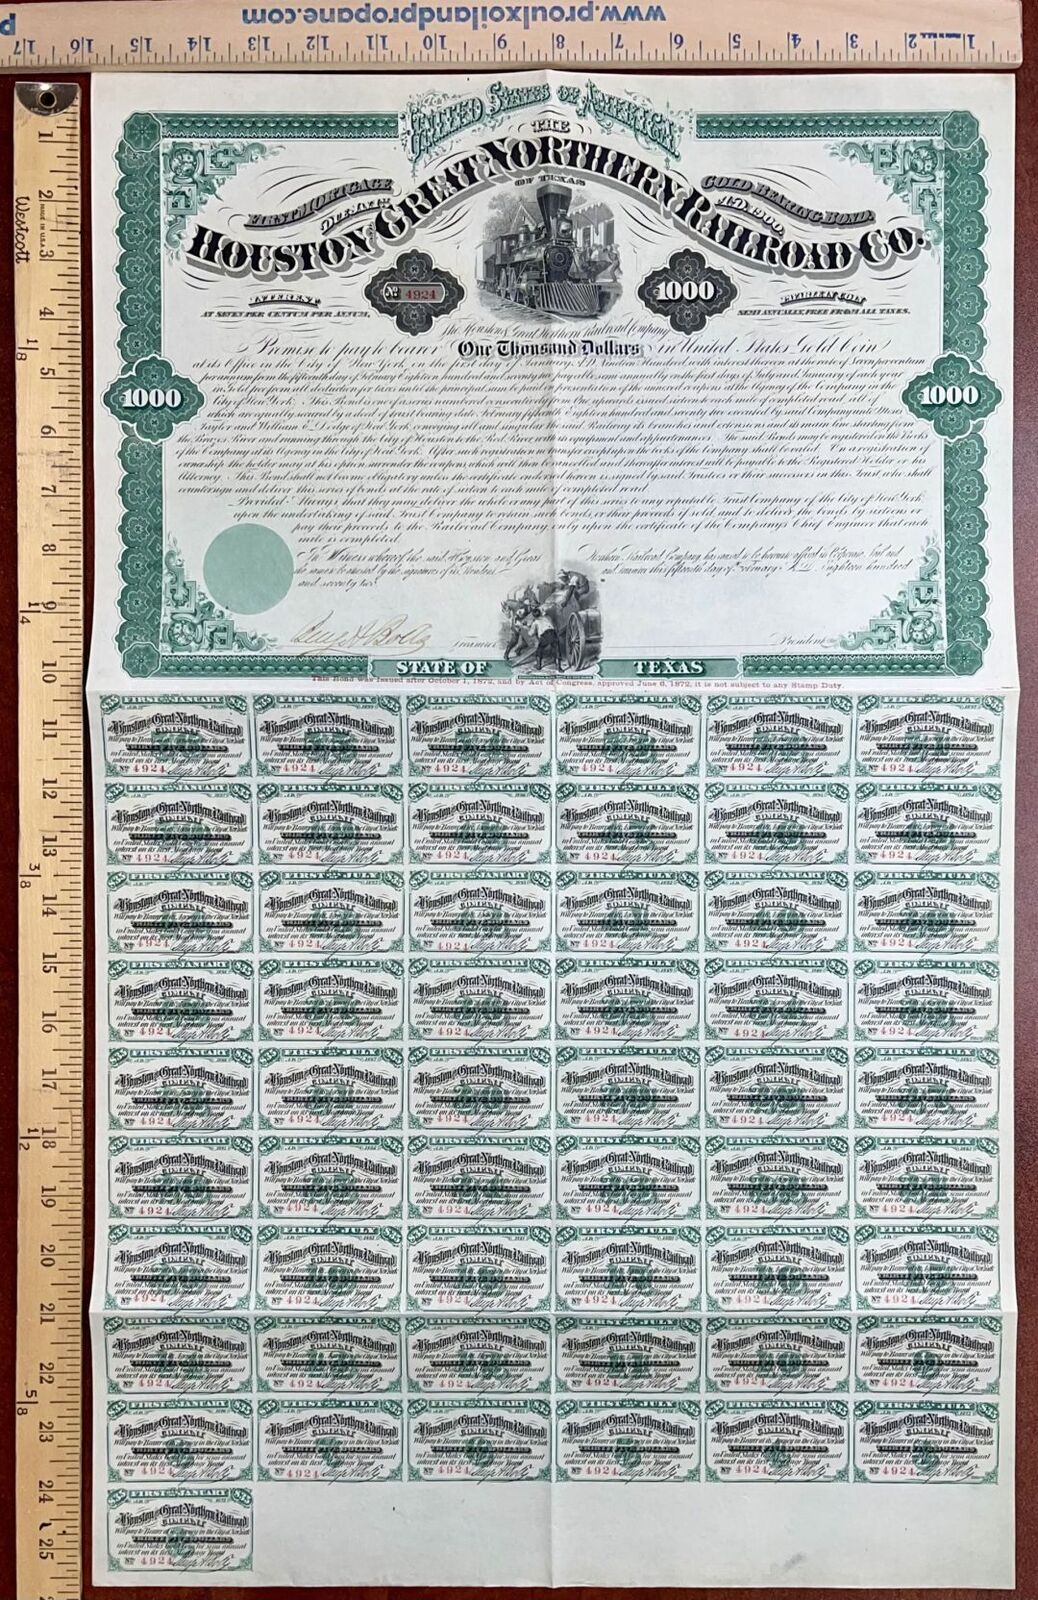 Houston and Great Northern Railroad - 1872 dated Partially Issued $1,000 Railway